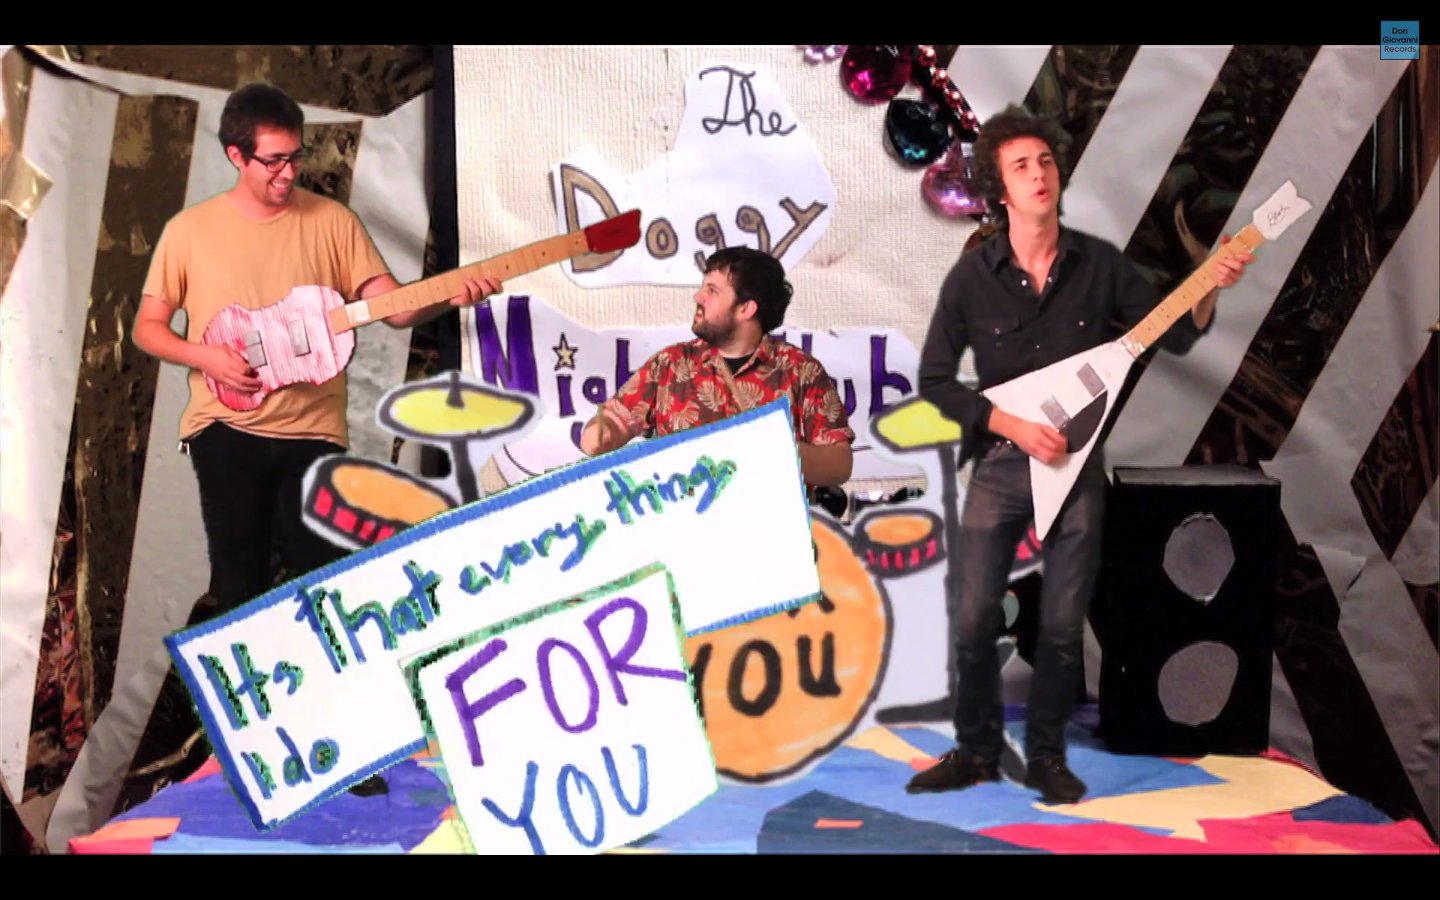 Nude-Beach-For-You-YouTube-Official-Music-Video-Lyrics-2